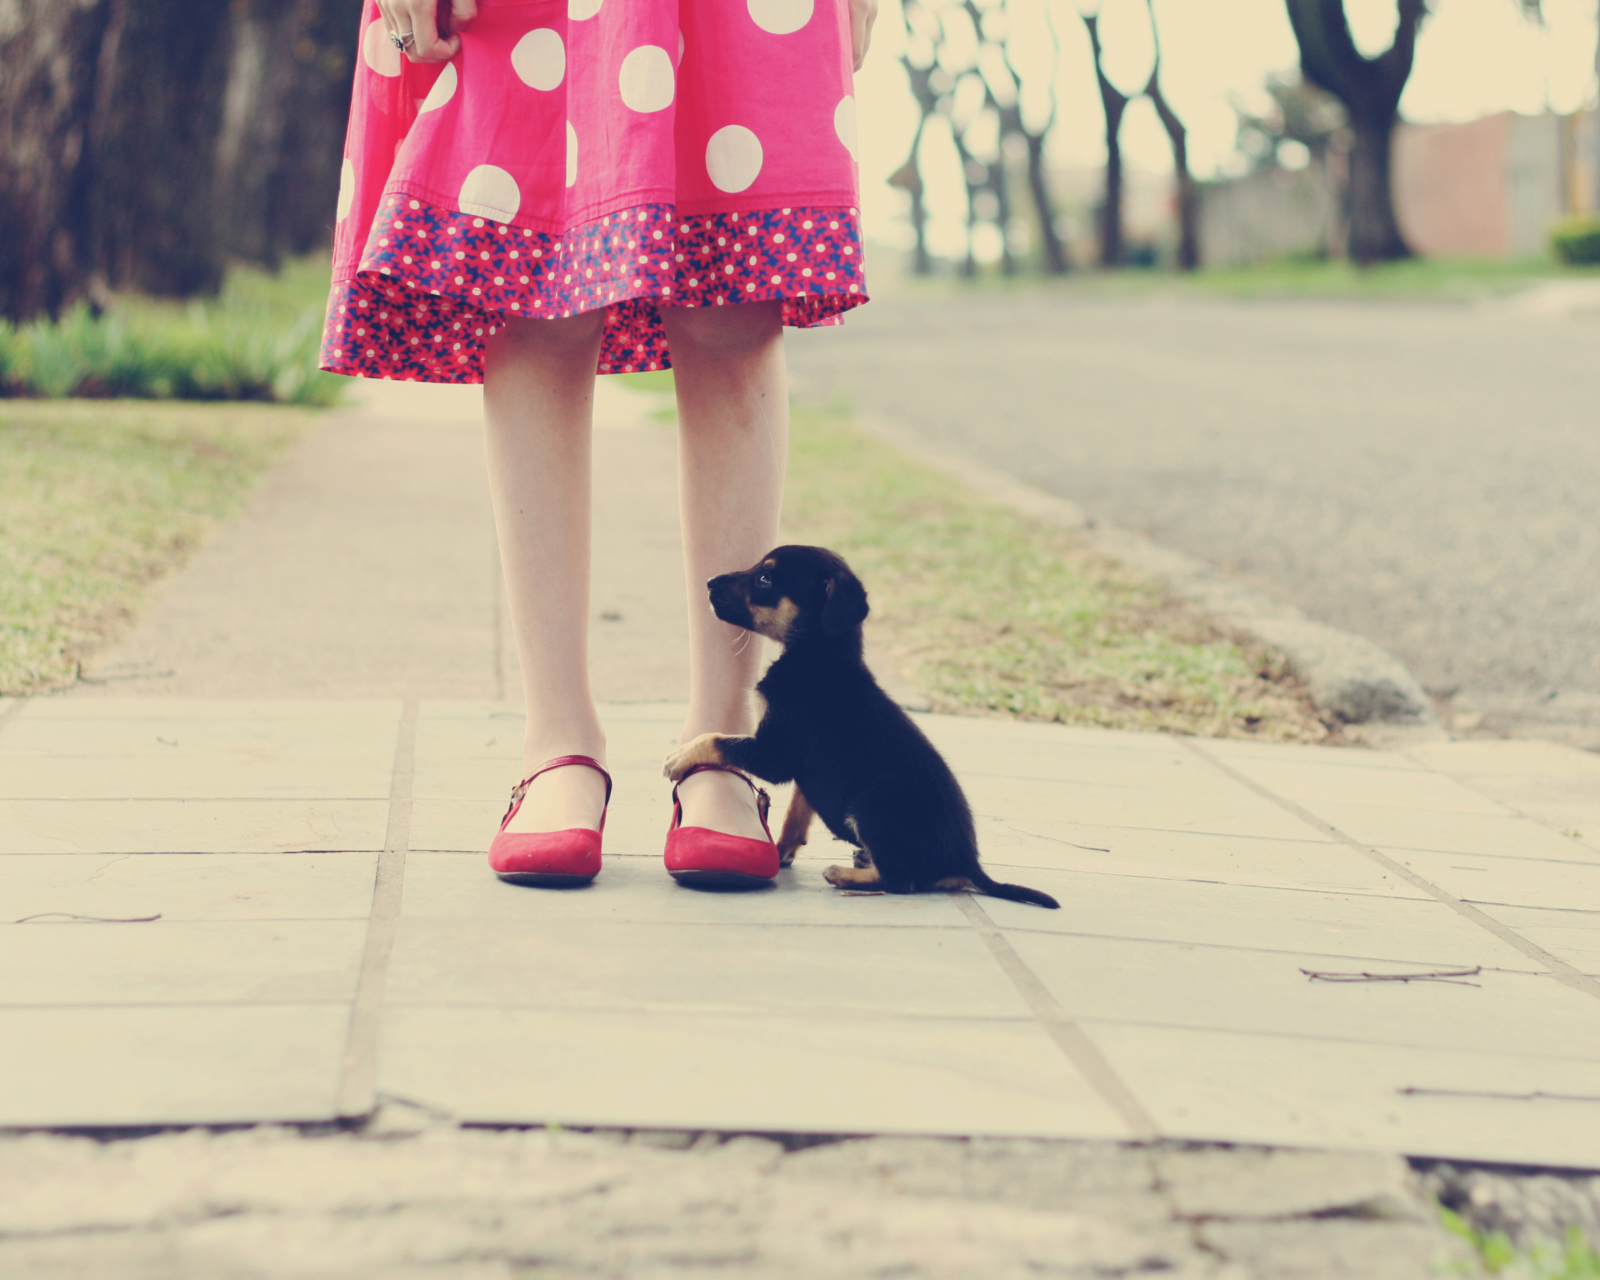 Girl In Polka Dot Dress And Her Puppy wallpaper 1600x1280